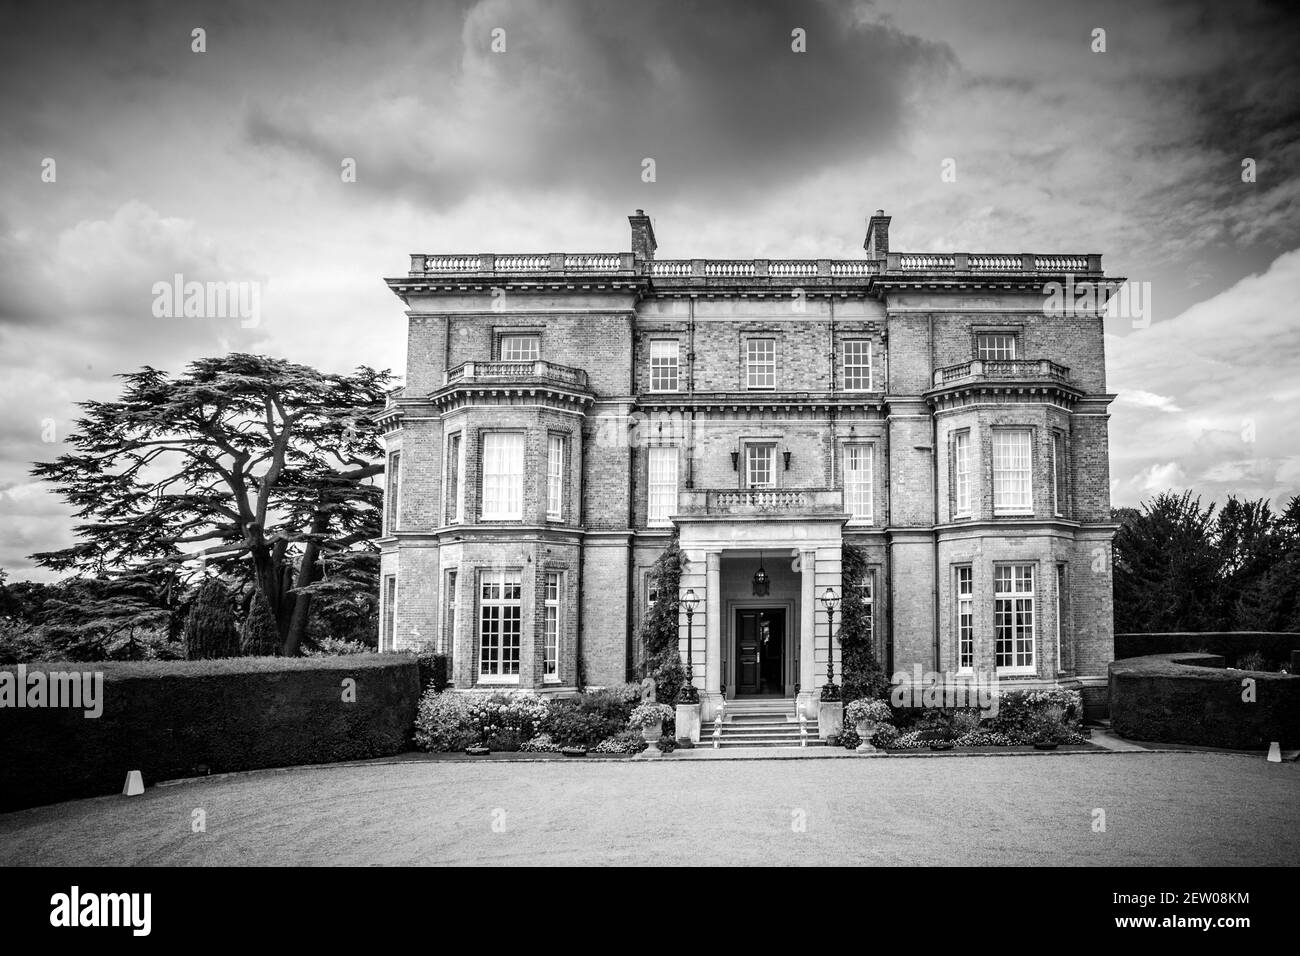 Hedsor House is a Georgian style mansion in the United Kingdom, located in Hedsor, Buckinghamshire, England. Stock Photo